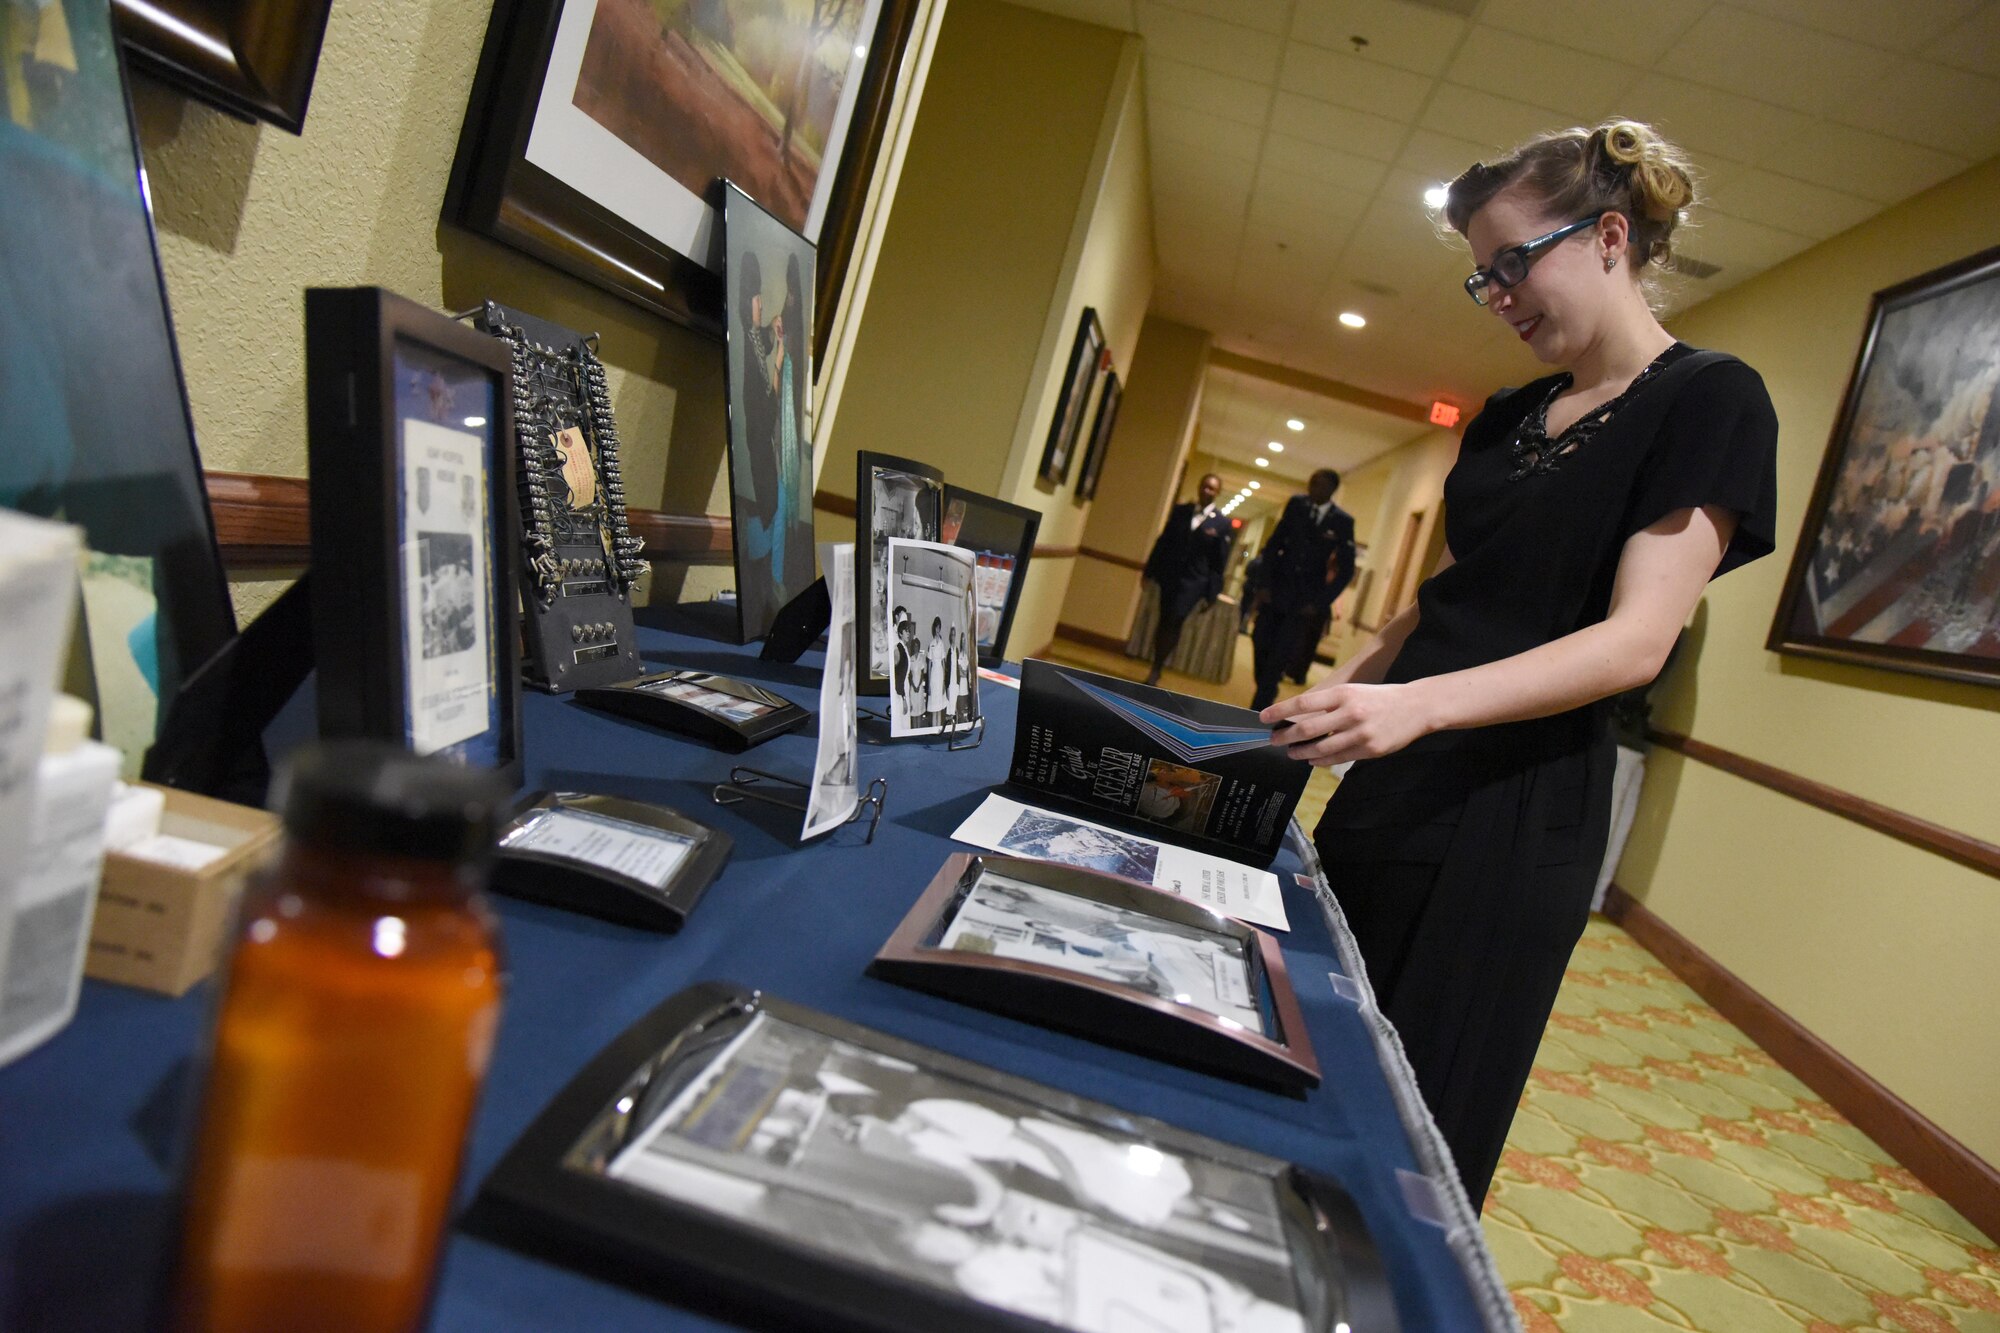 Airman 1st Class Troin Yost, 81st Medical Operations Squadron medical technician, inspects Air Force memorabilia during the U.S. Air Force 70th Birthday Ball at the Bay Breeze Event Center Sept. 16, 2017, on Keesler Air Force Base, Mississippi. The event, hosted by the 81st Training Wing and the John C. Stennis Chapter of the Air Force Association, also paid tribute to all prisoners of war and military members still missing in action. (U.S. Air Force photo by Kemberly Groue)